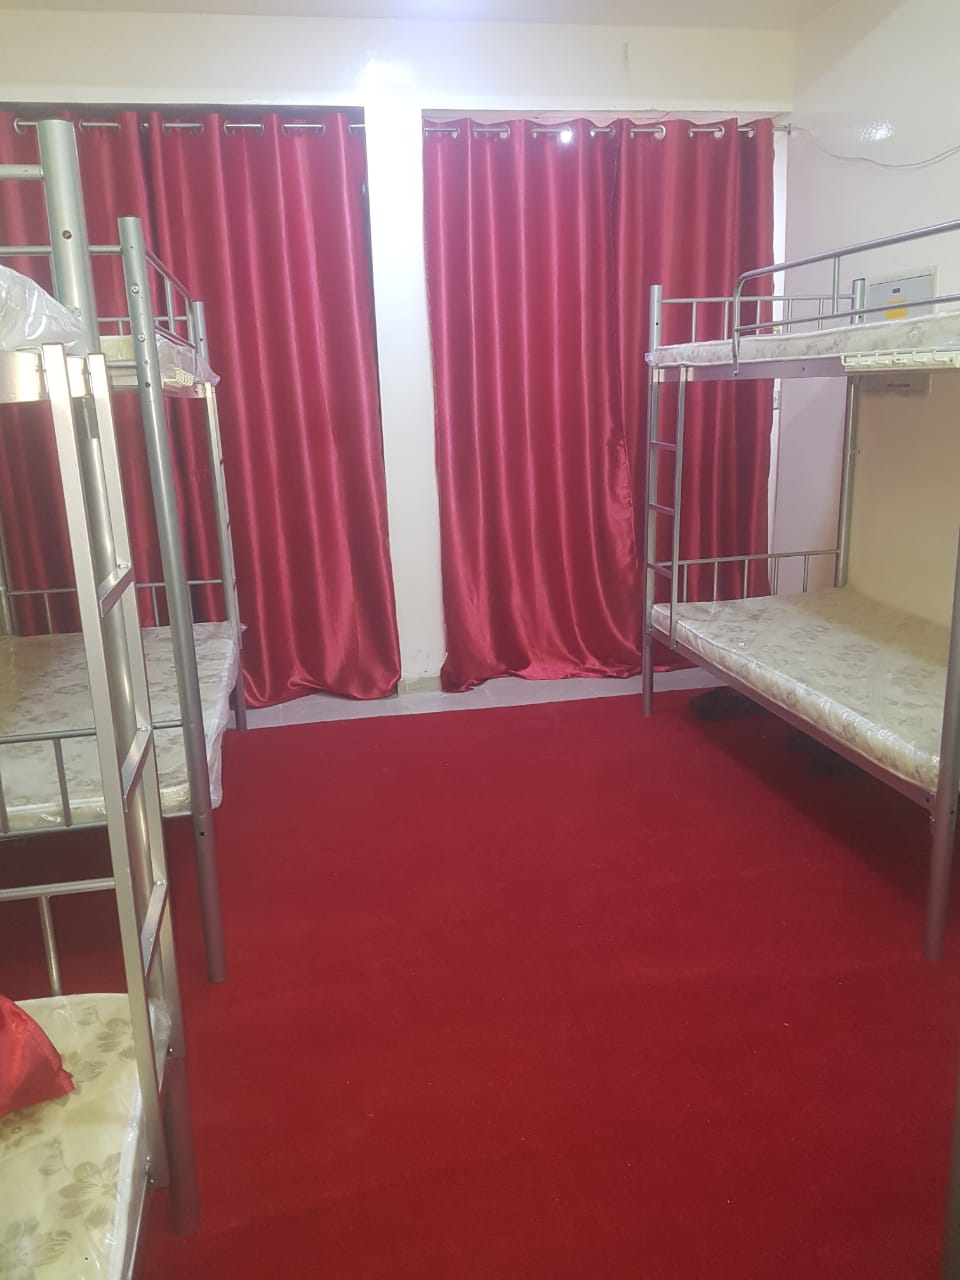 UPPER LOWER DECK BED SPACE for INDIAN PAK GENTS/LADIES (New build